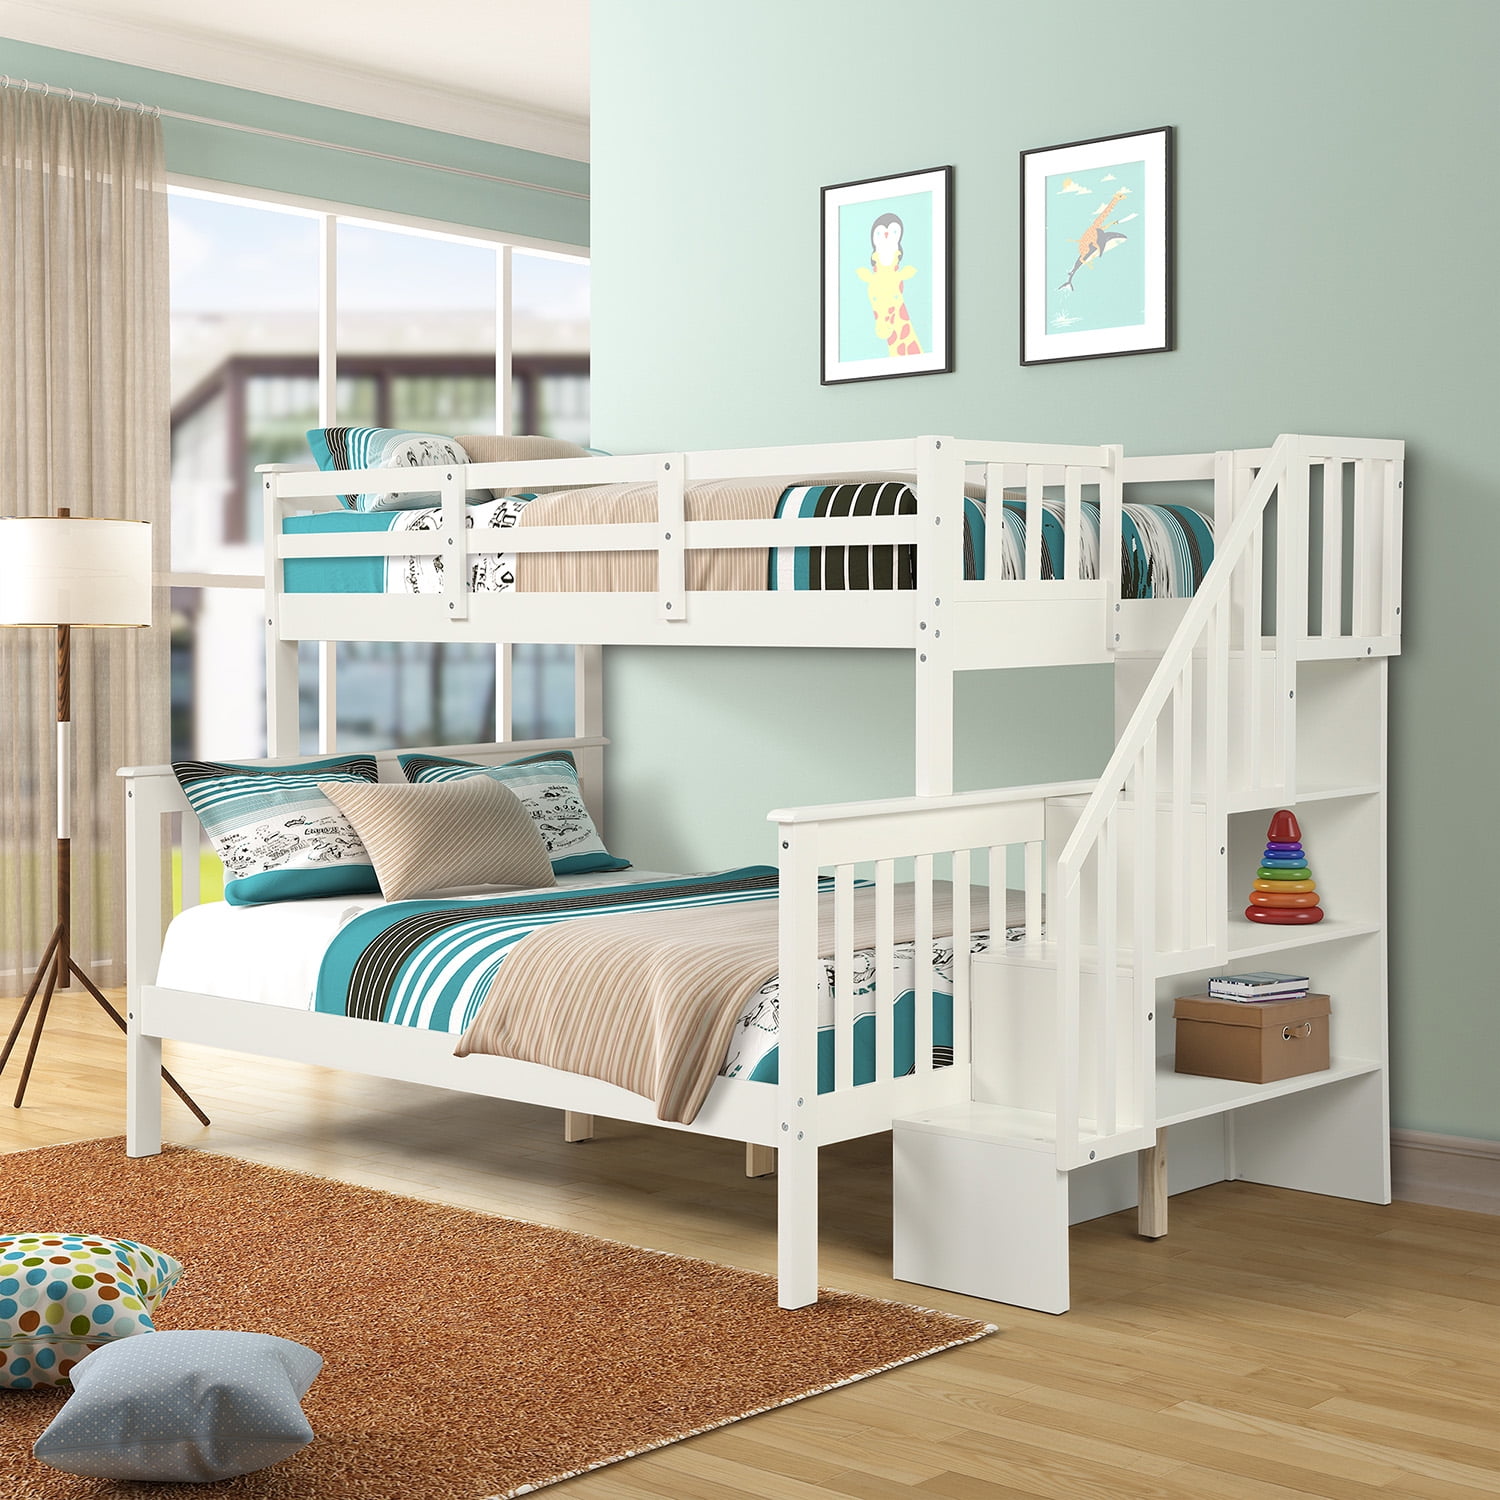 Stairway Bunk Bed Twin Over Full Size, Bunk Bed Bedding For Boy And Girl